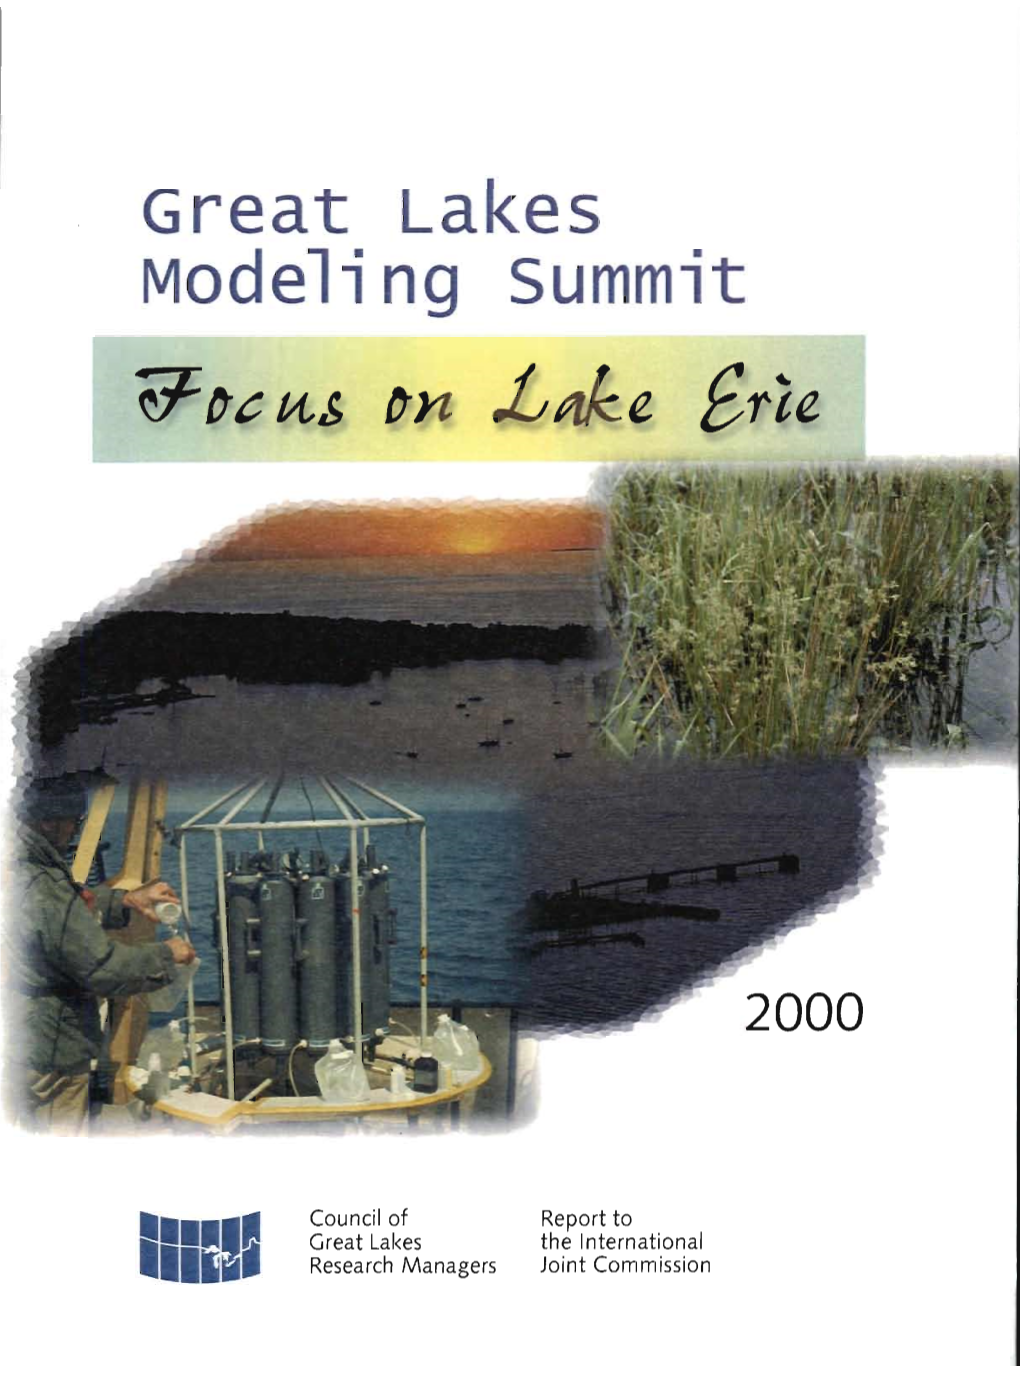 Council of Great Lakes Research Managers Report to The